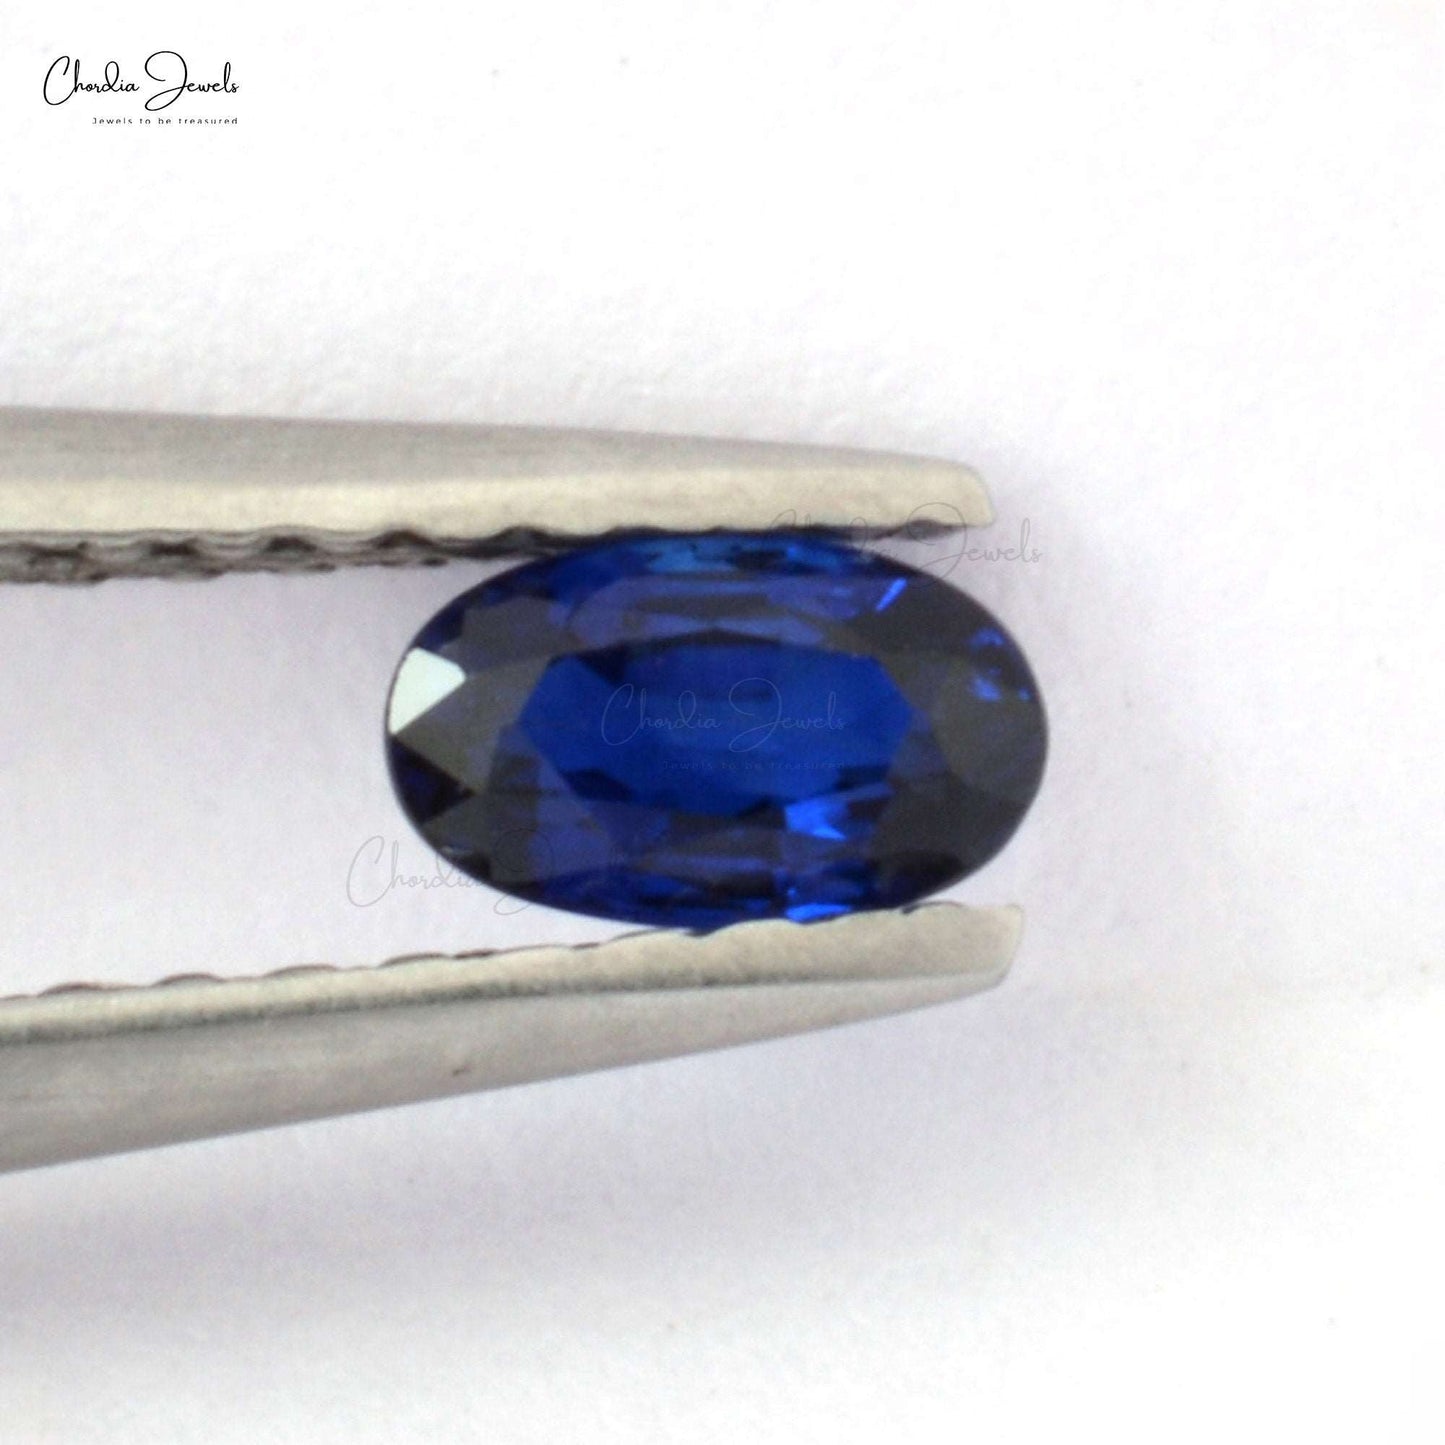 Load image into Gallery viewer, 1/2 Carat Oval Cut High Quality Natural Blue Sapphire Gemstones
